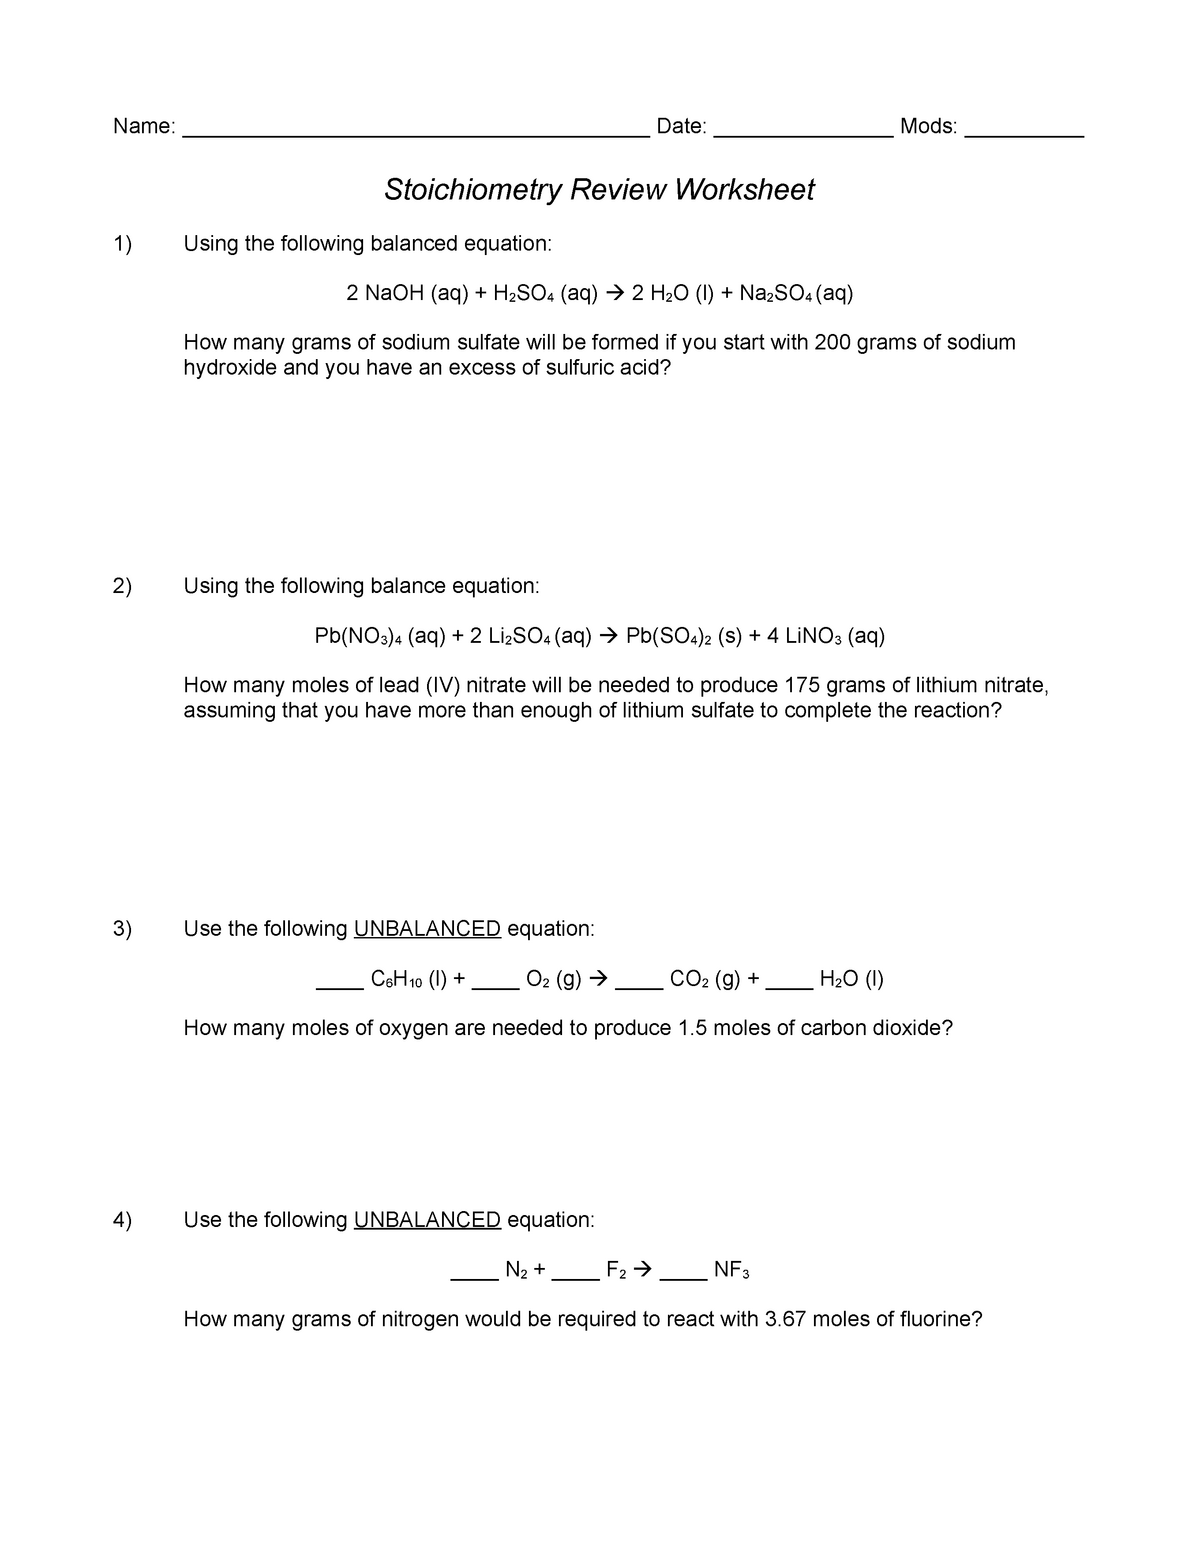 Stoichiometry Review Worksheet Practice Material - fundamental Inside Chemistry Review Worksheet Answers